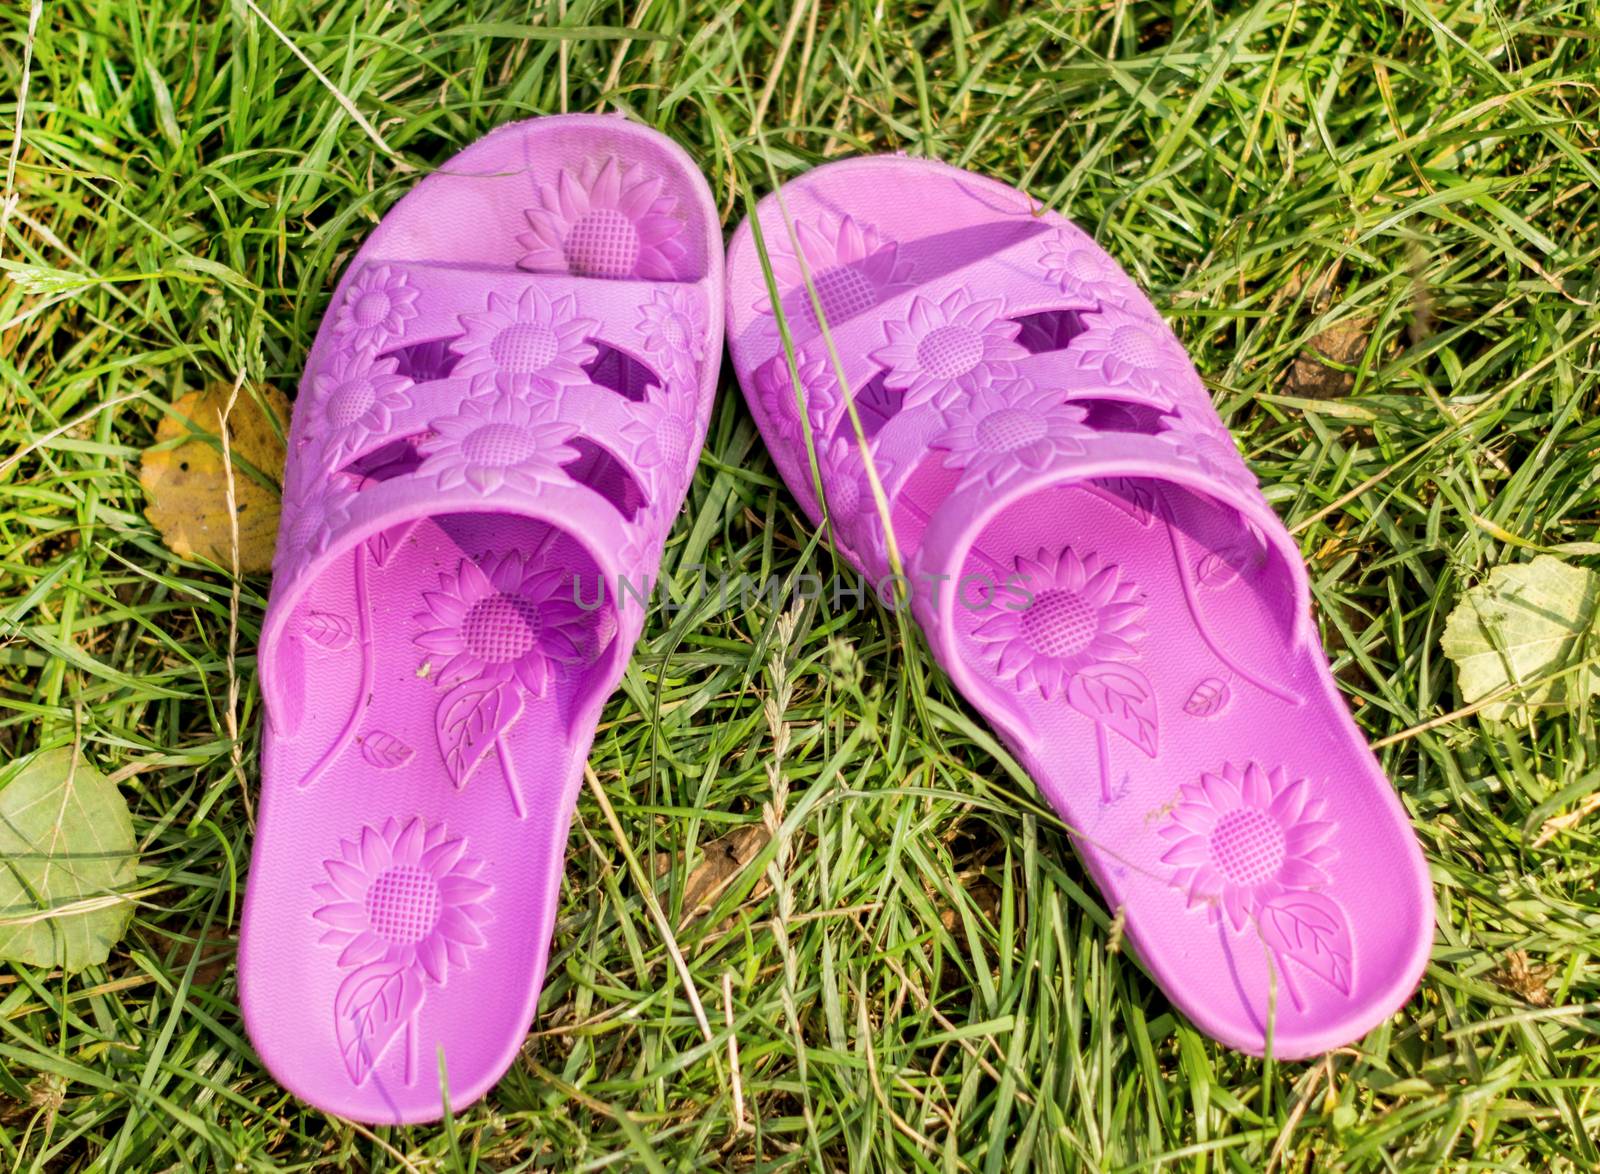 A pair of flip flops are left on field of a relaxed day. For your commercial and editorial use.